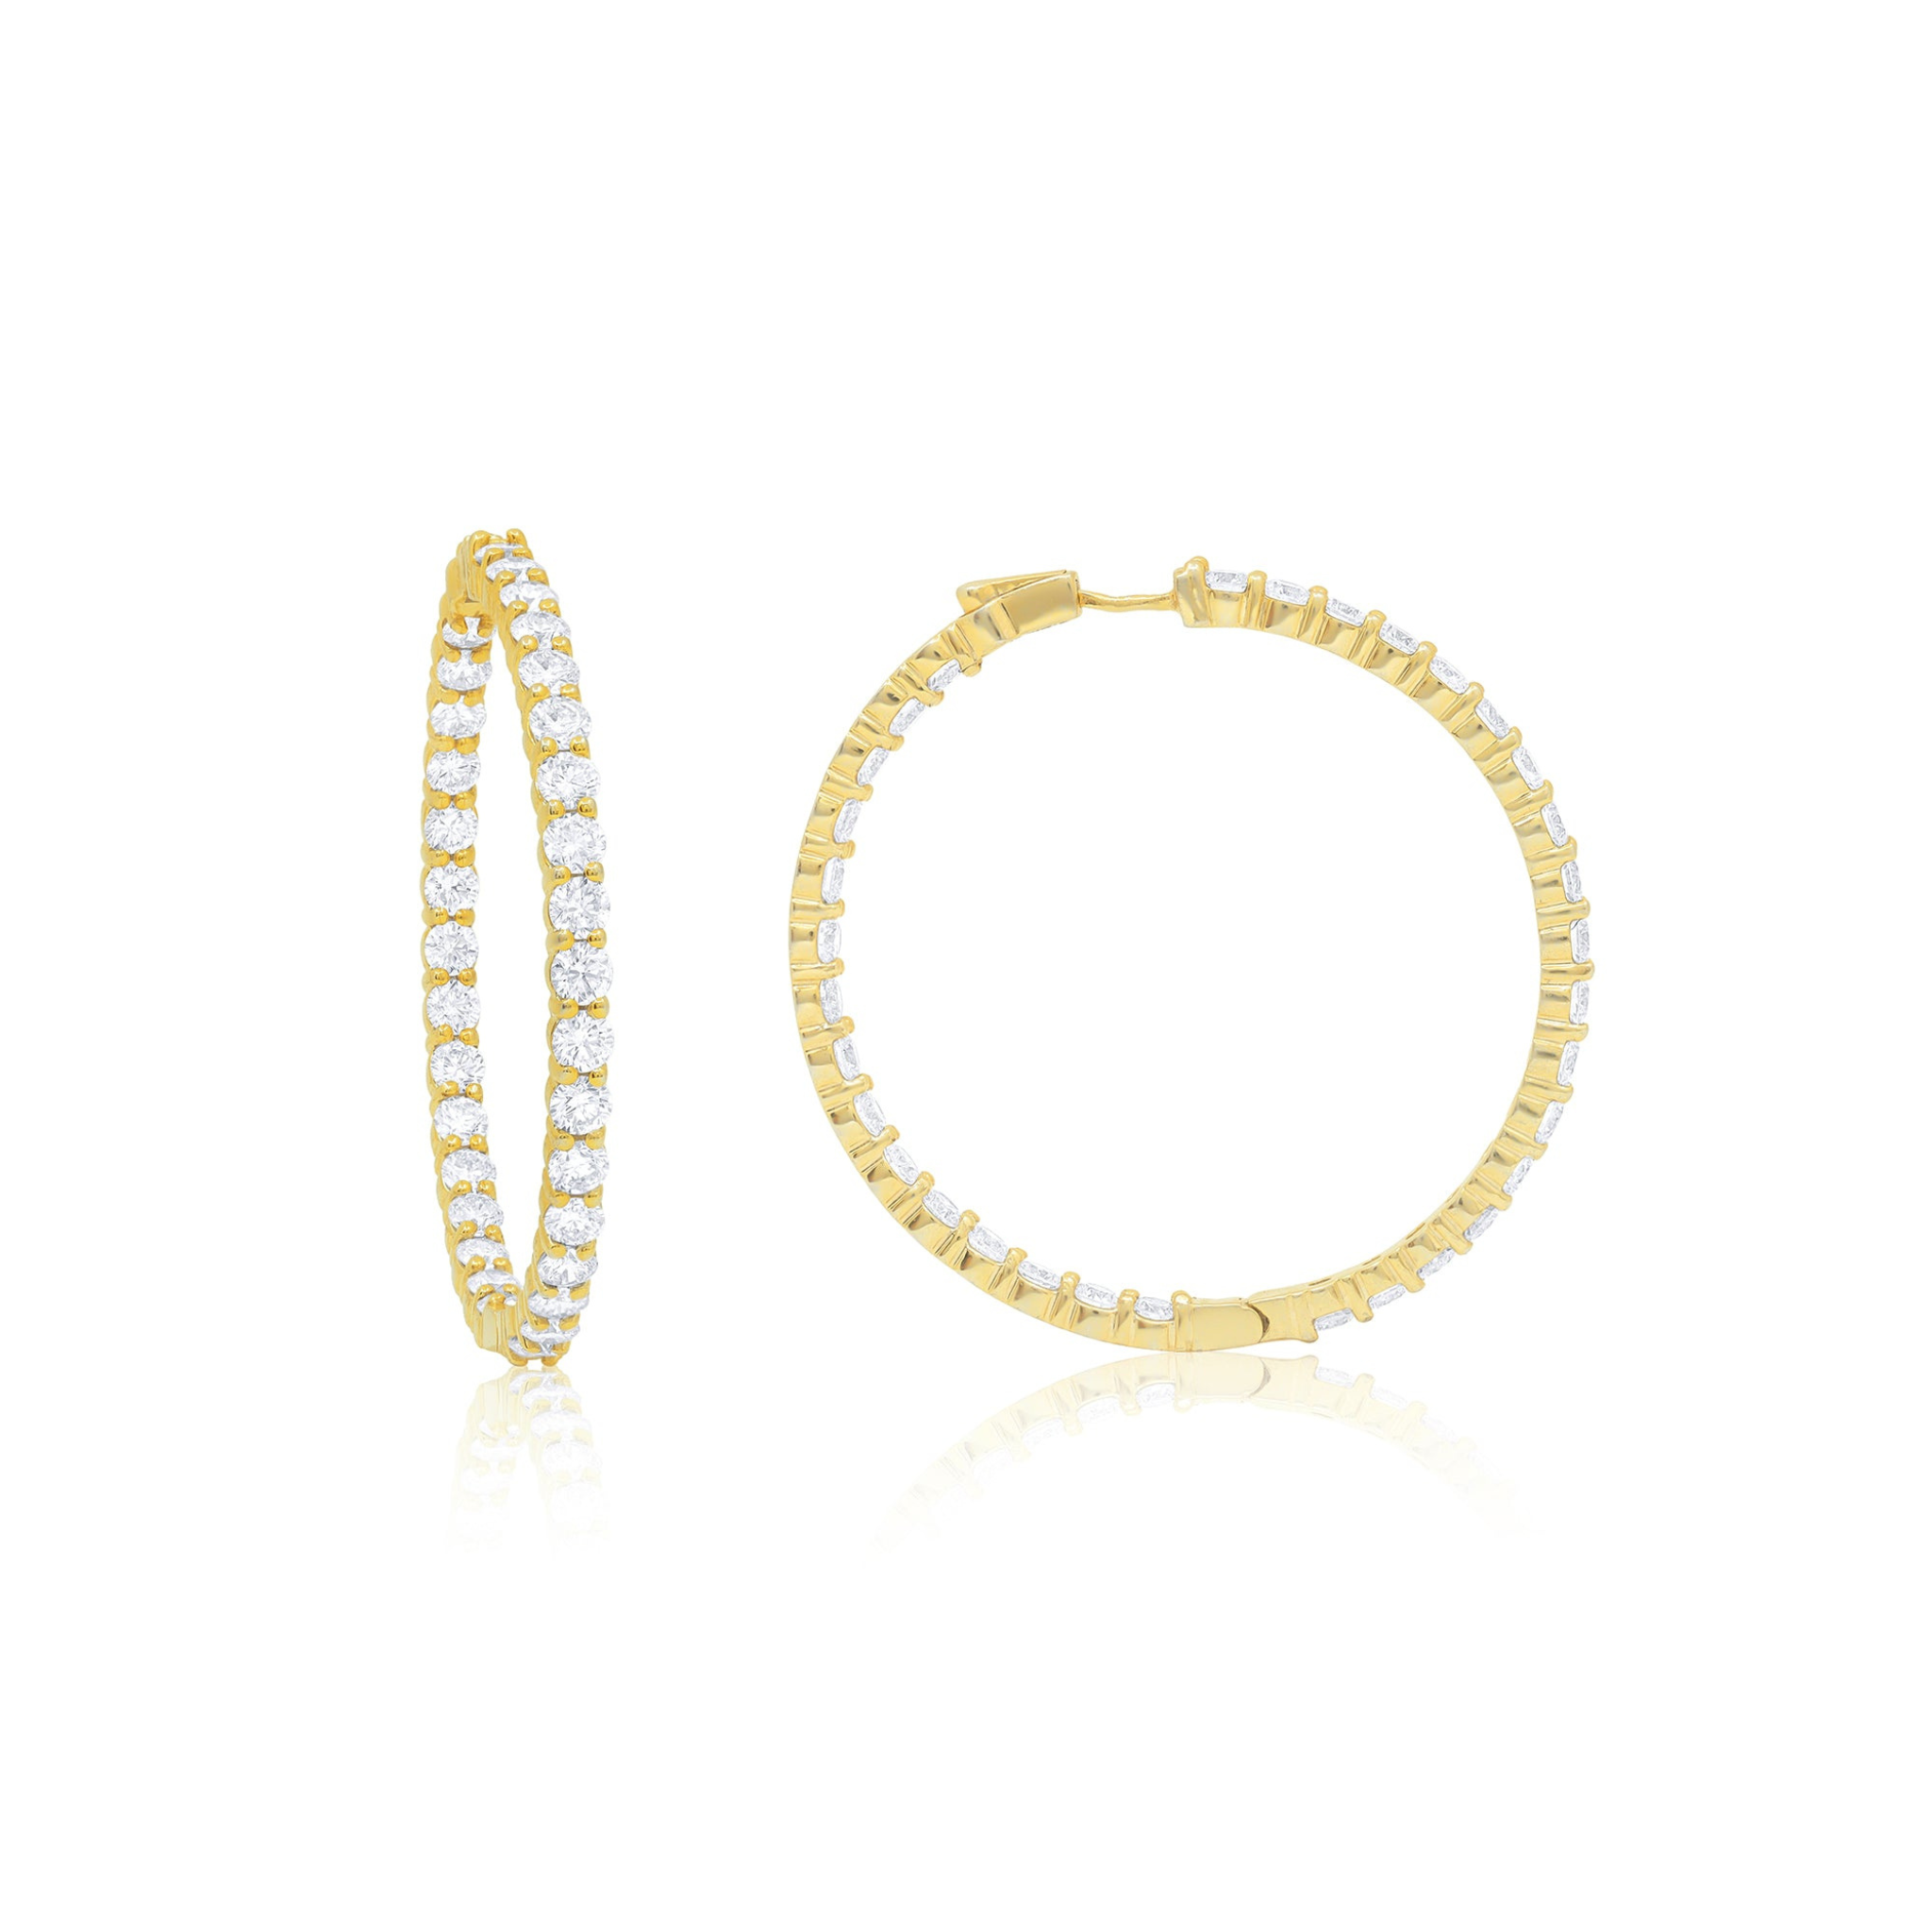 18 Kt Yellow Gold 1.50" Hoop Earrings with 9.70 cts.jpg